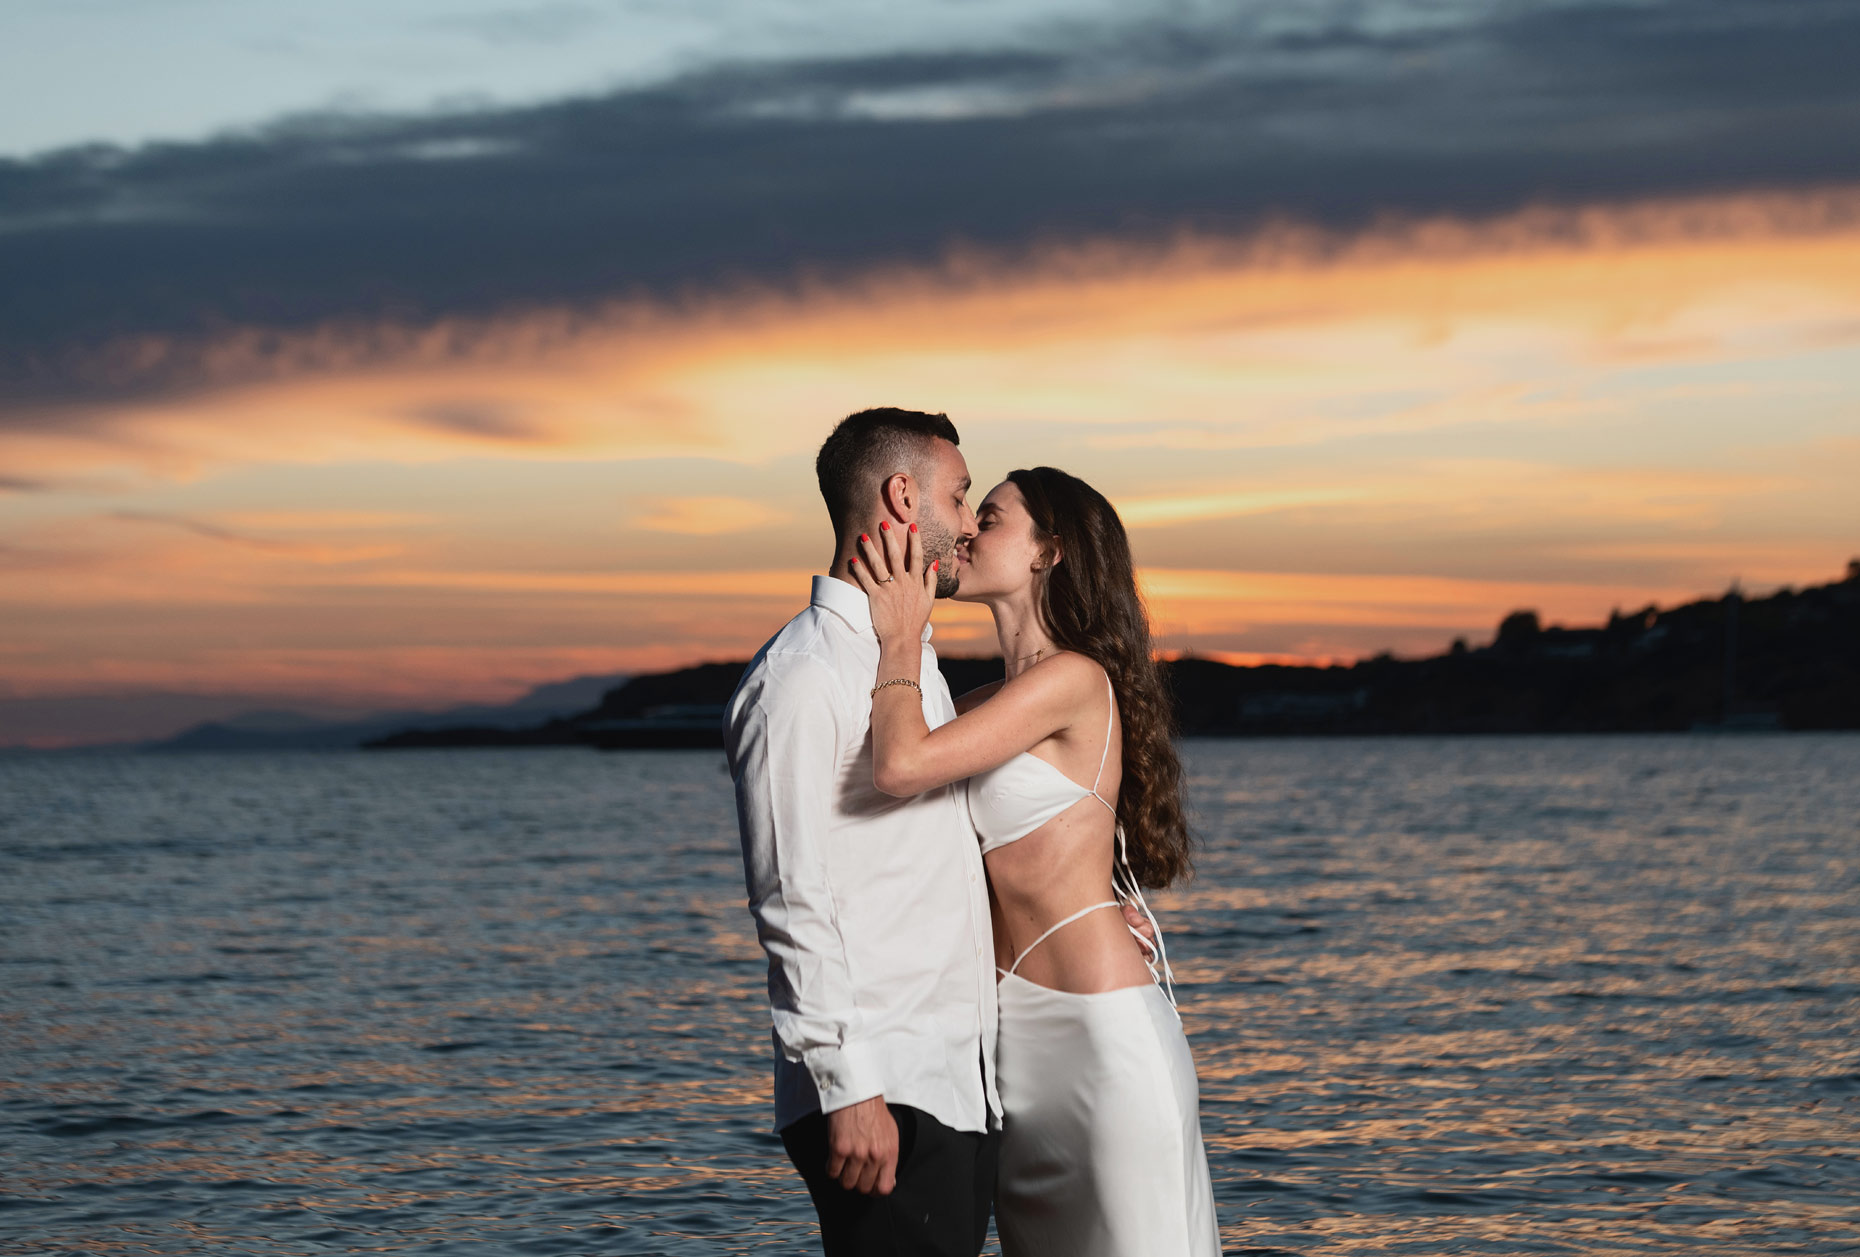 sunset couple session and wedding proposal in Athens Greece